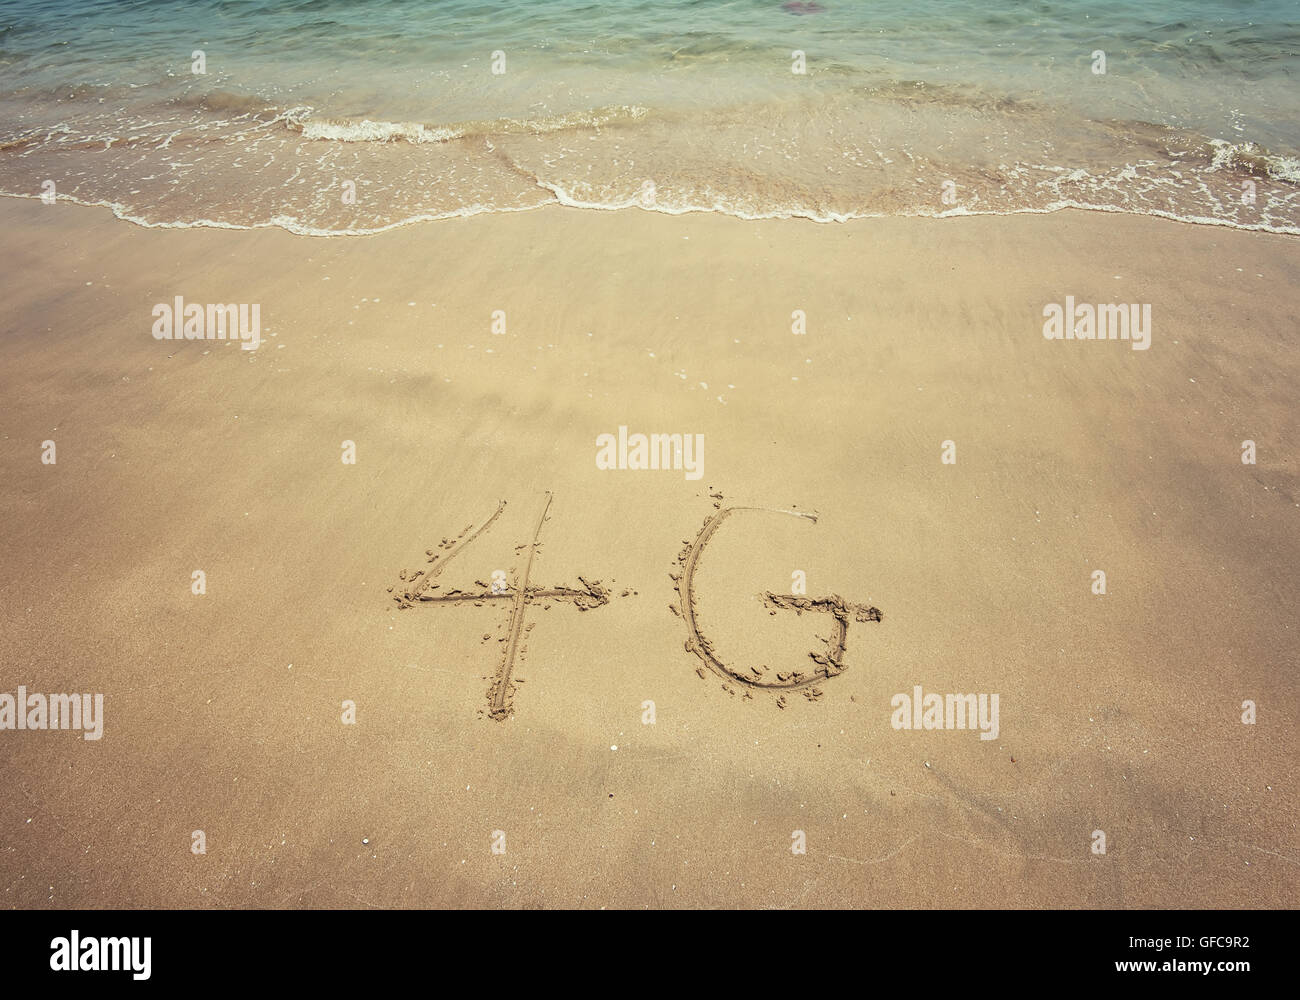 4g written in the sand Stock Photo